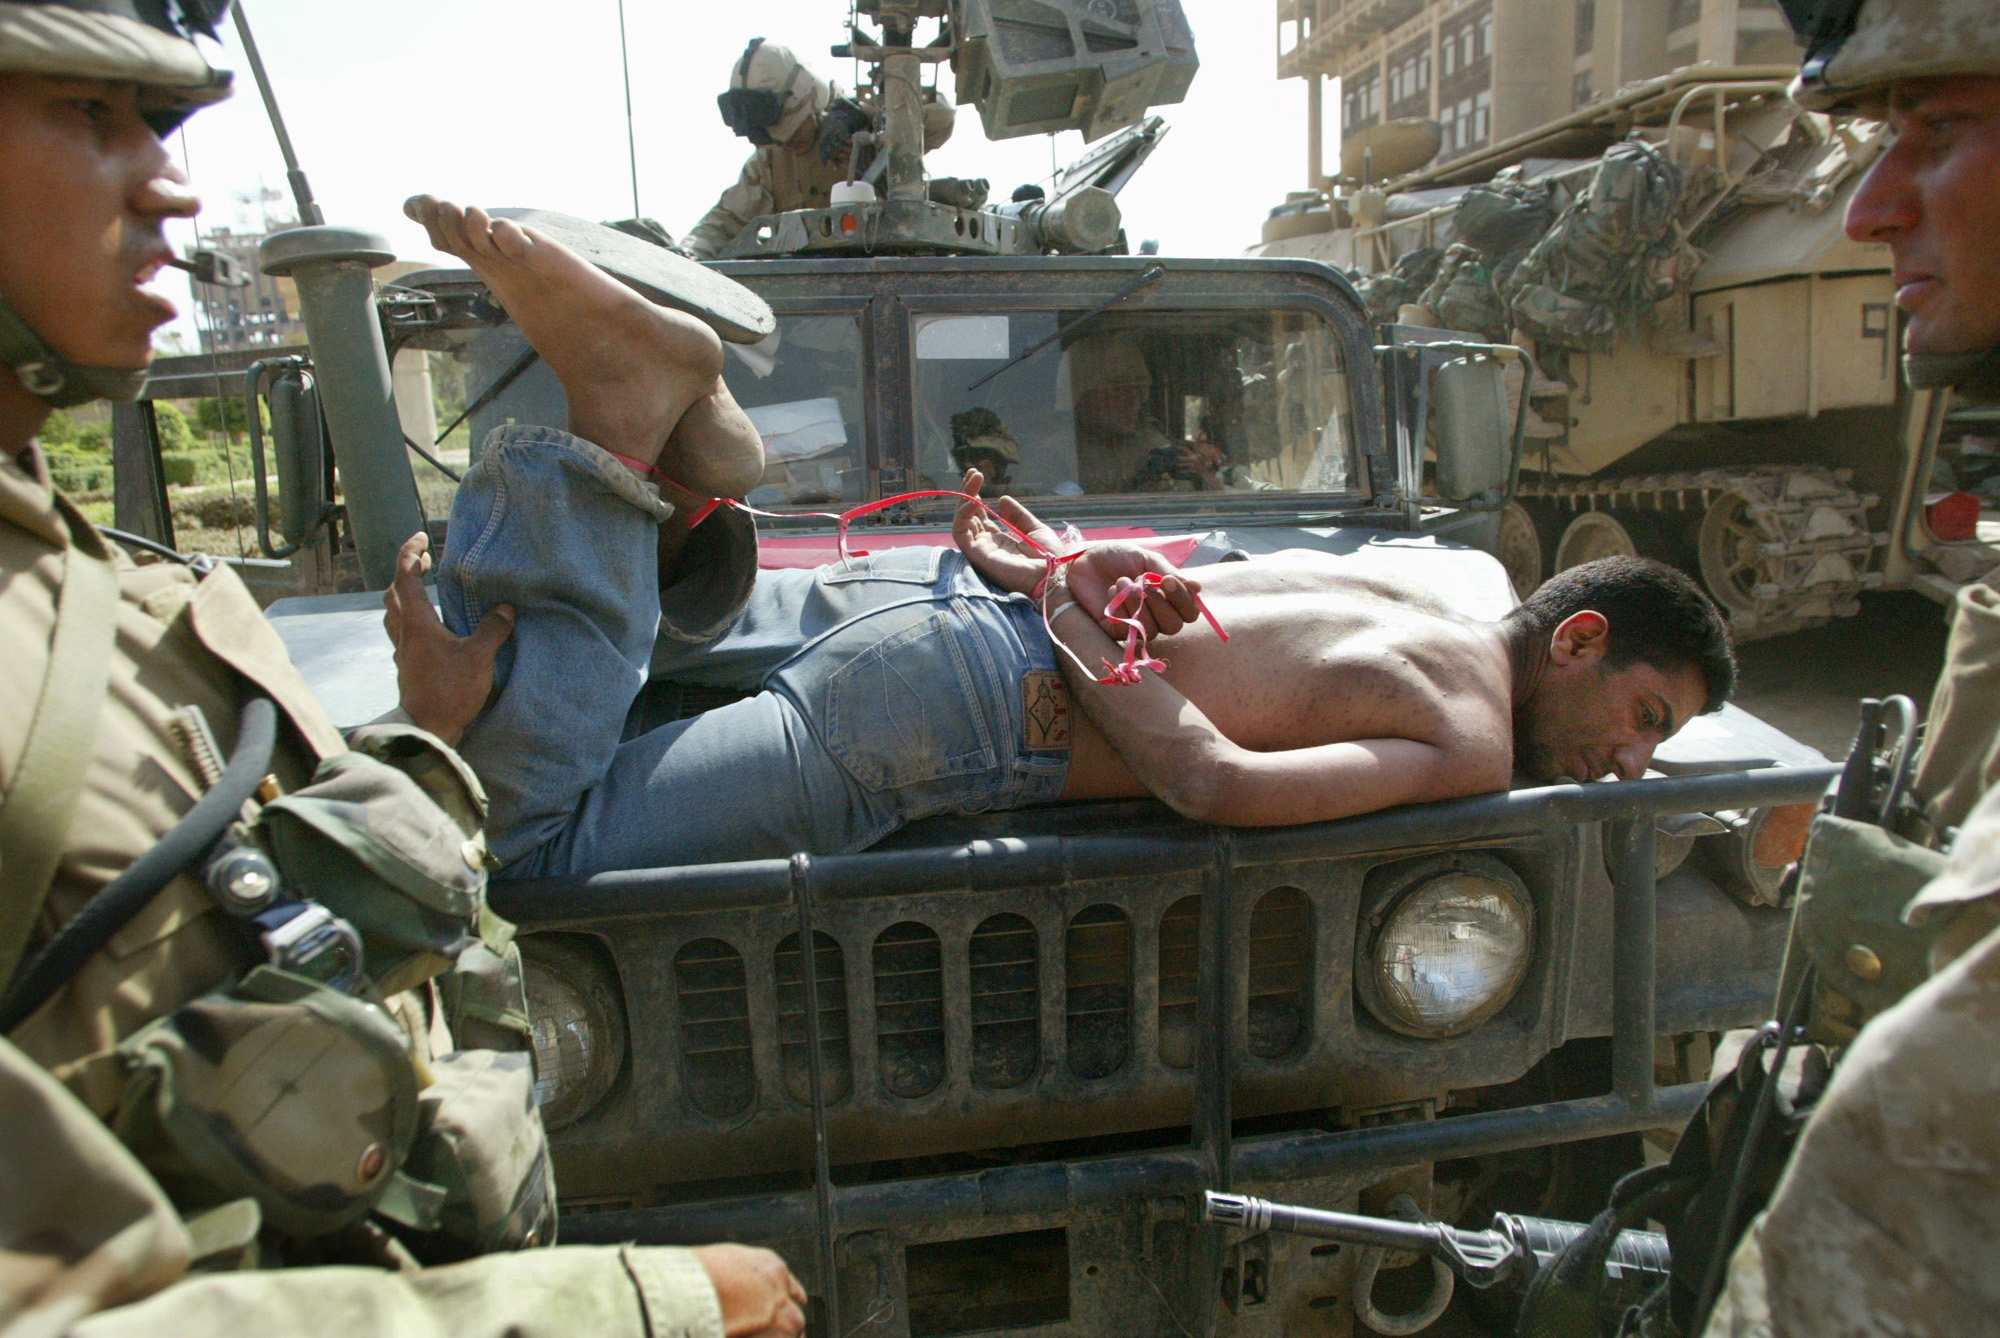 A man accused of looting at a Baghdad bank, is brought to a US military base tied to the hood of a Humvee in Baghdad, Iraq,  April 14, 2003.